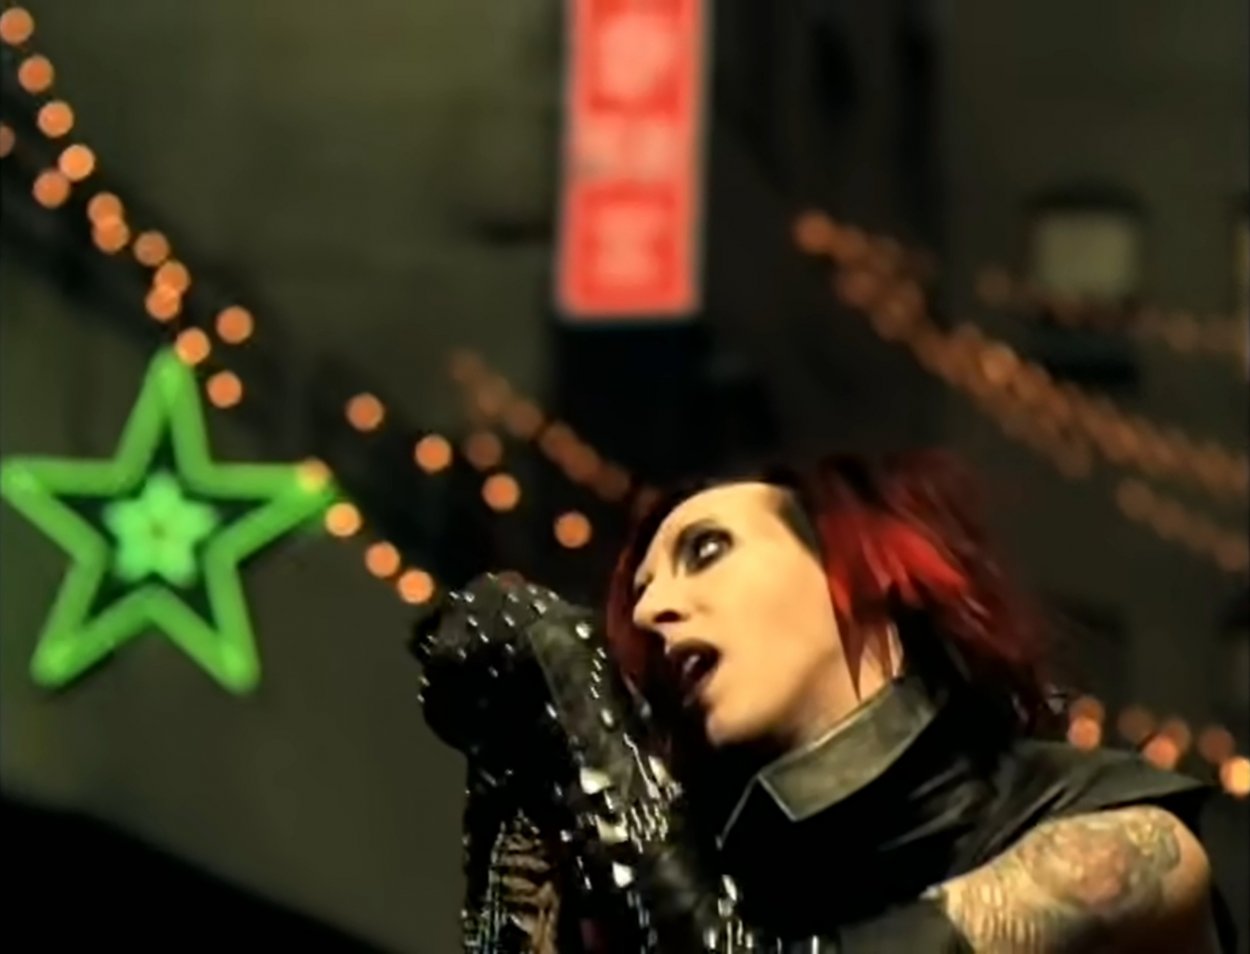 Marilyn Manson singing in the "Coma White" music video